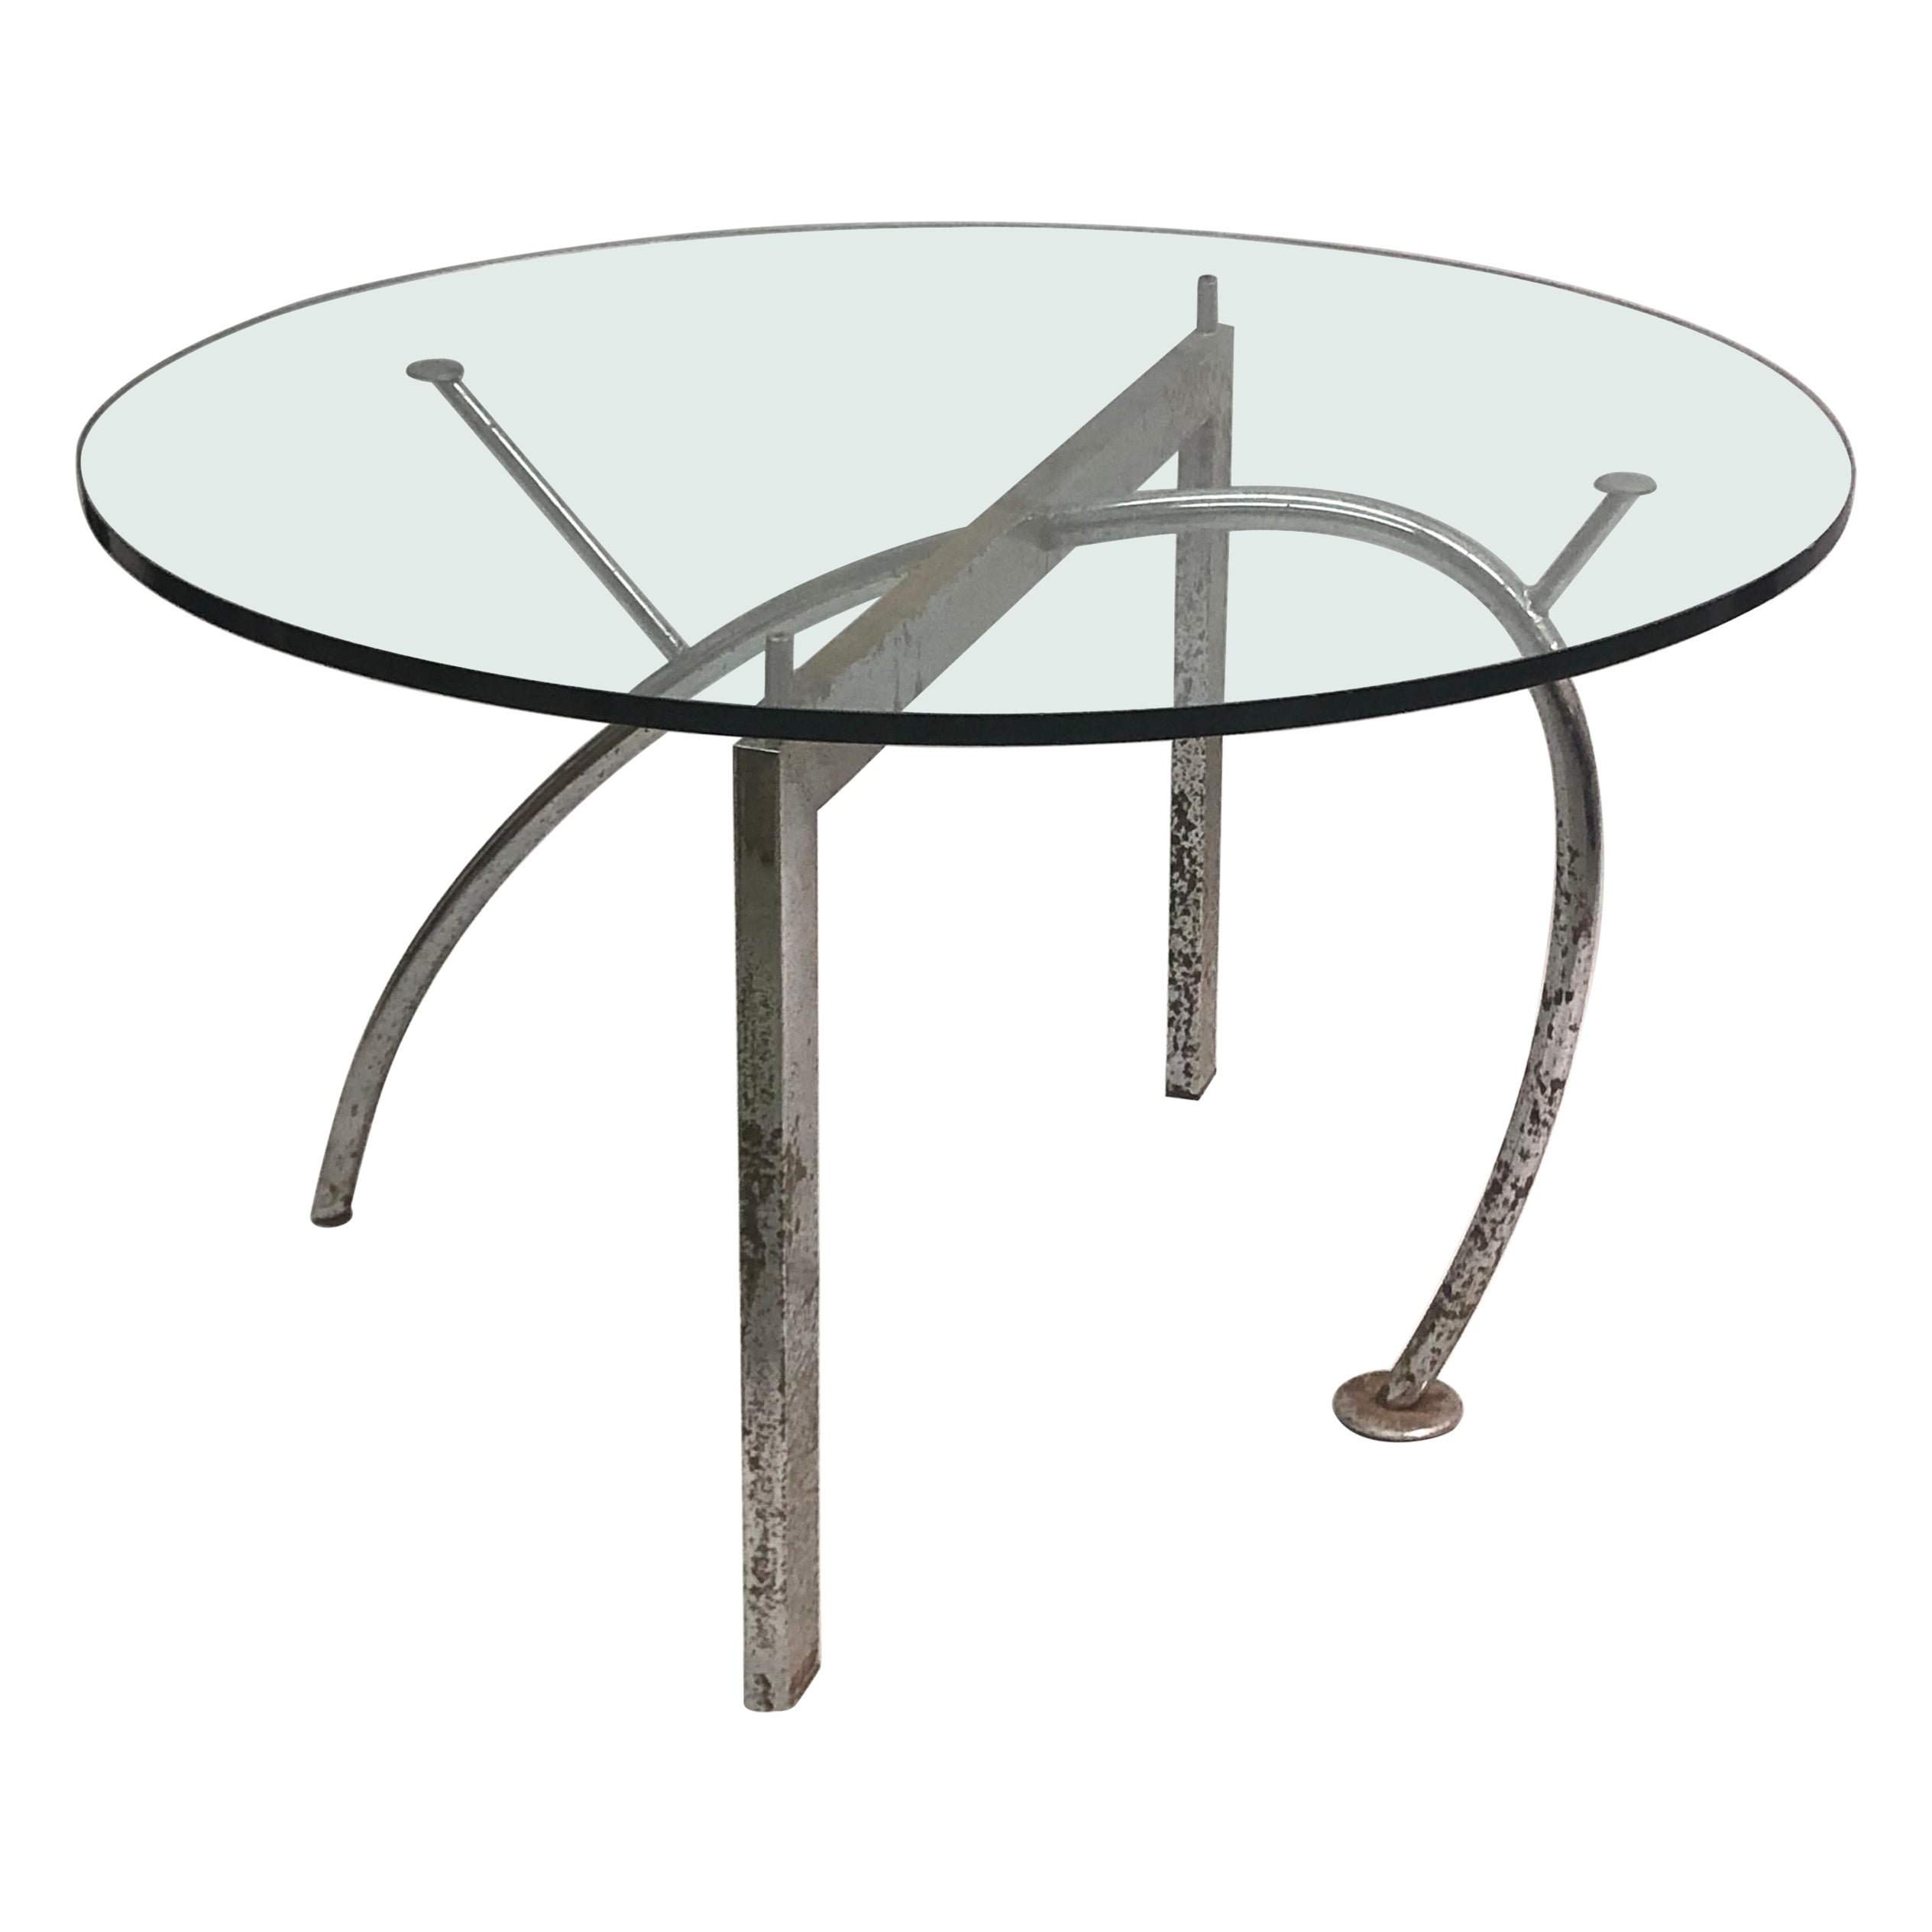 Italian Post Modern Round Dining Table Prototype by Massimo Iosa Ghini For Sale